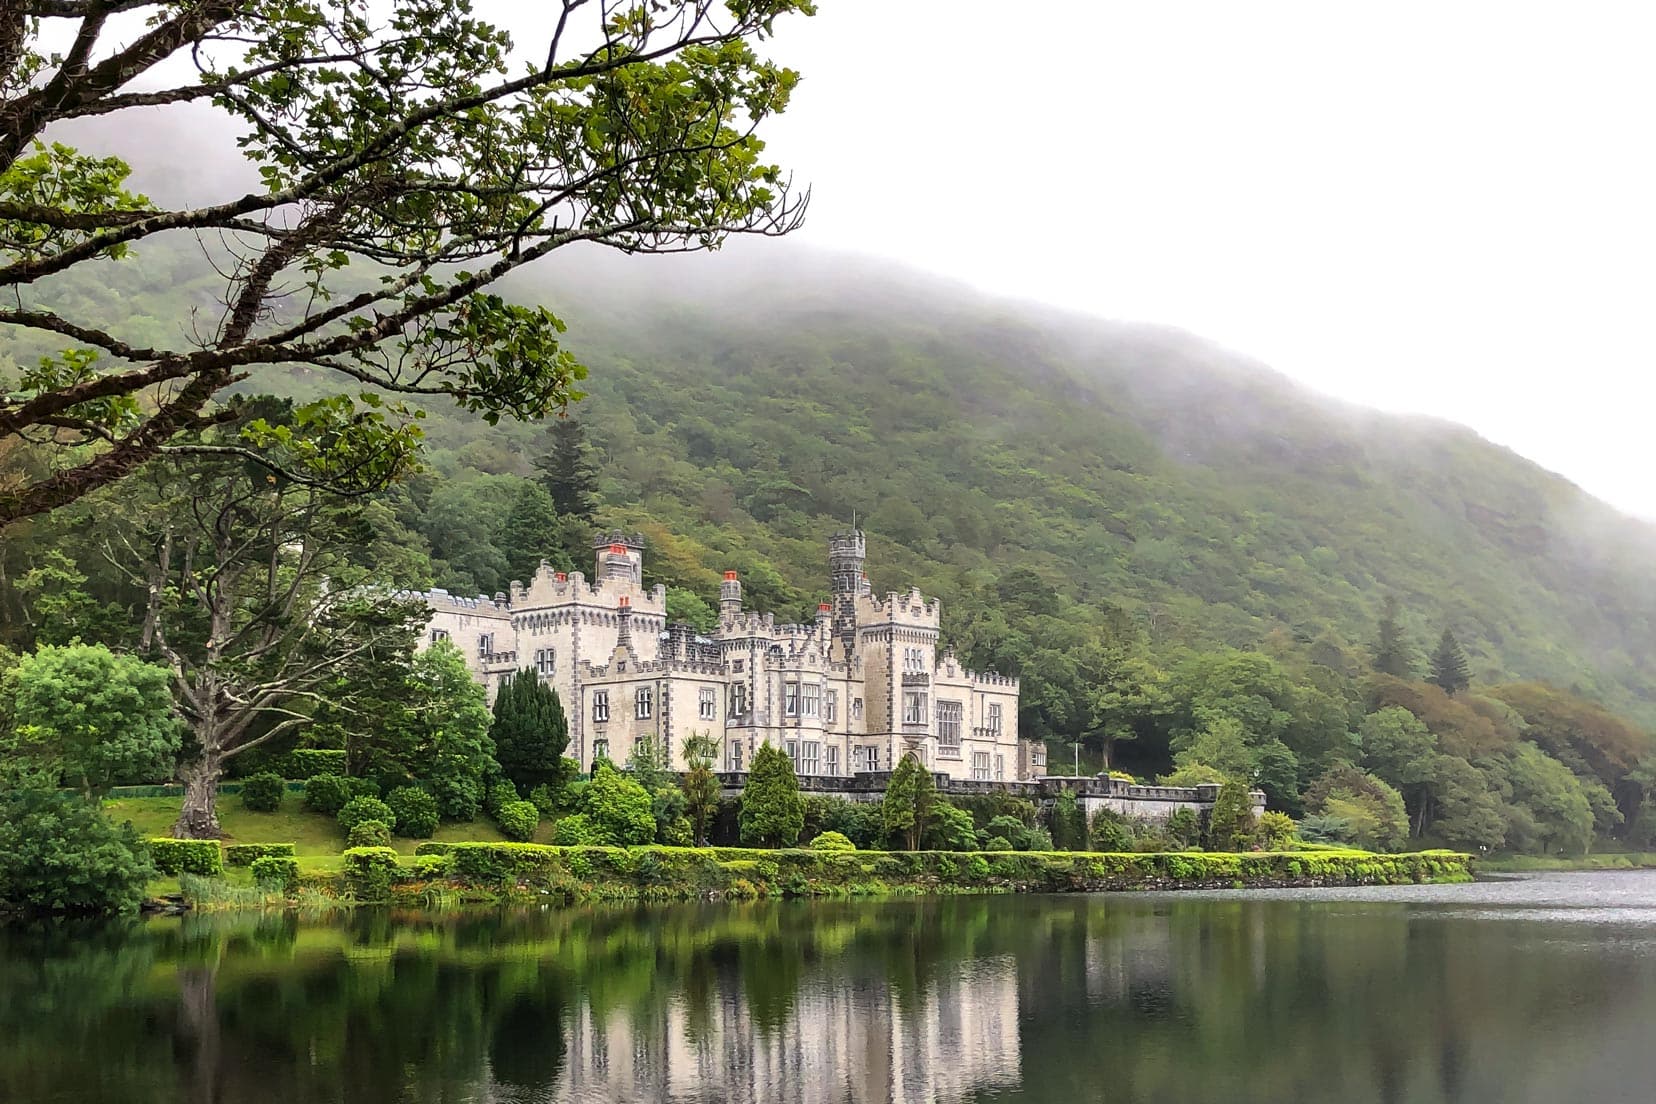 Kylemore-Abbey-seen-from-path-leading-in with a lake in the foreground and forested hill in the background